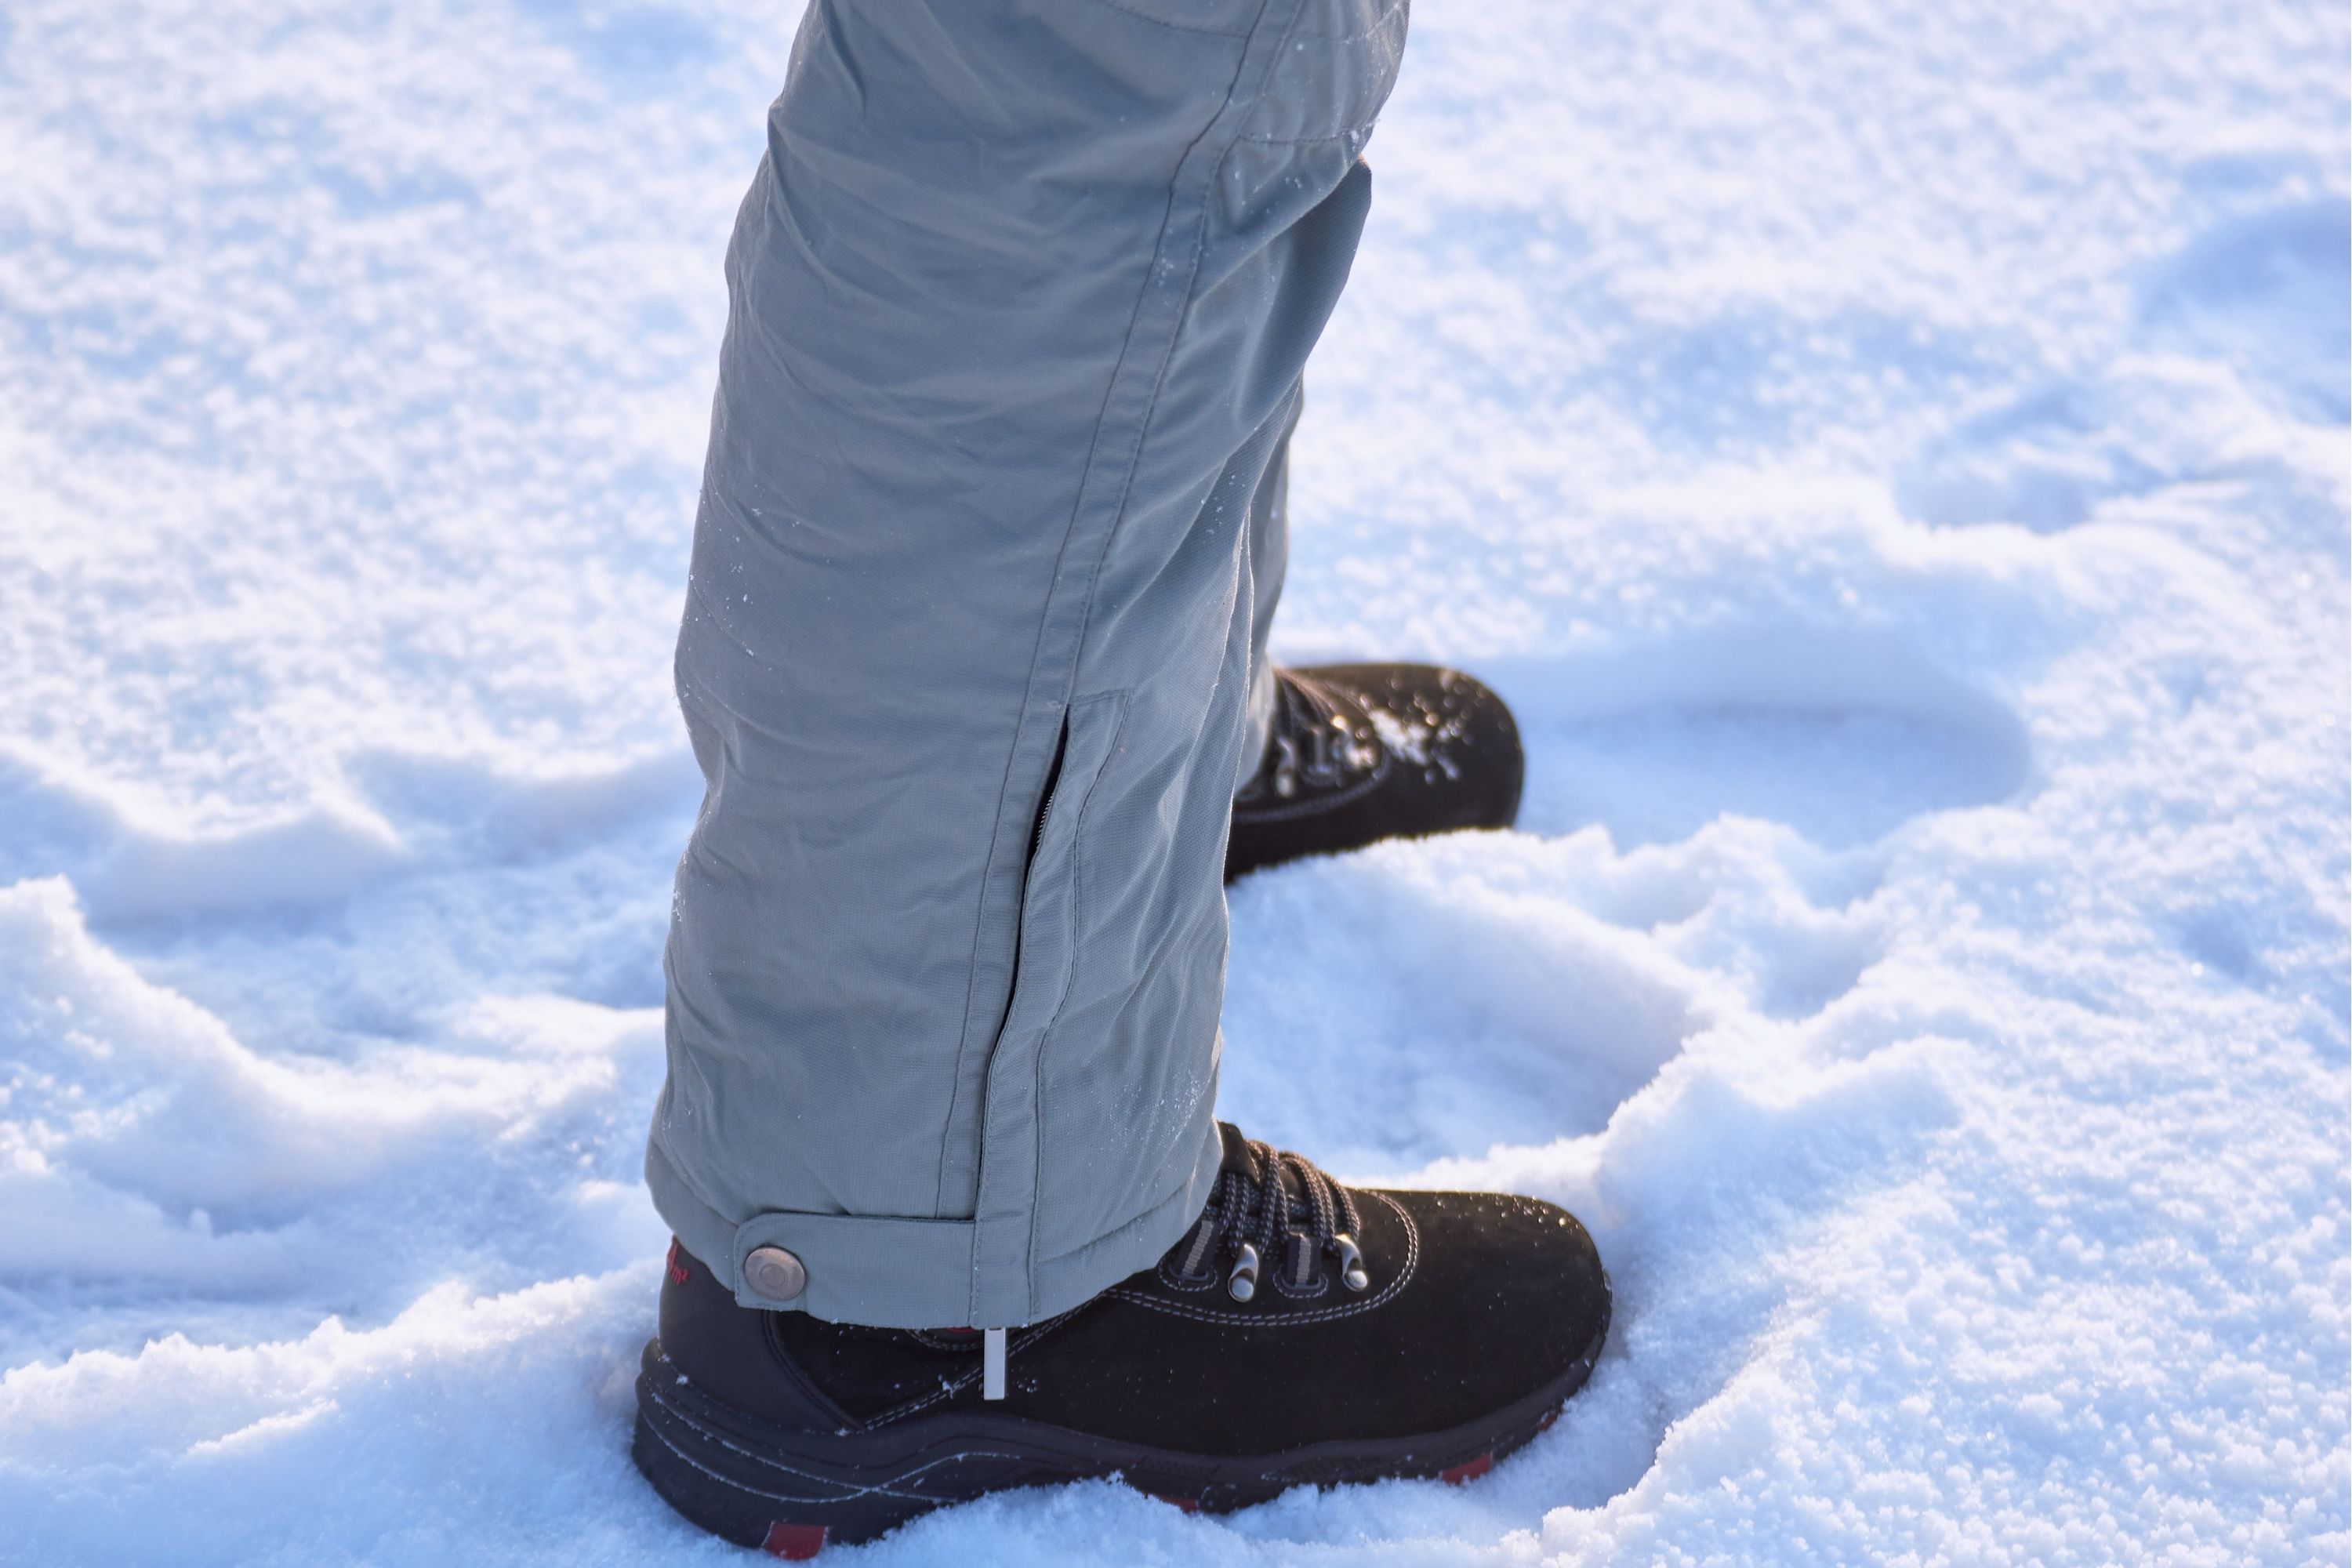 What to Wear If You Don’t Have Snow Pants